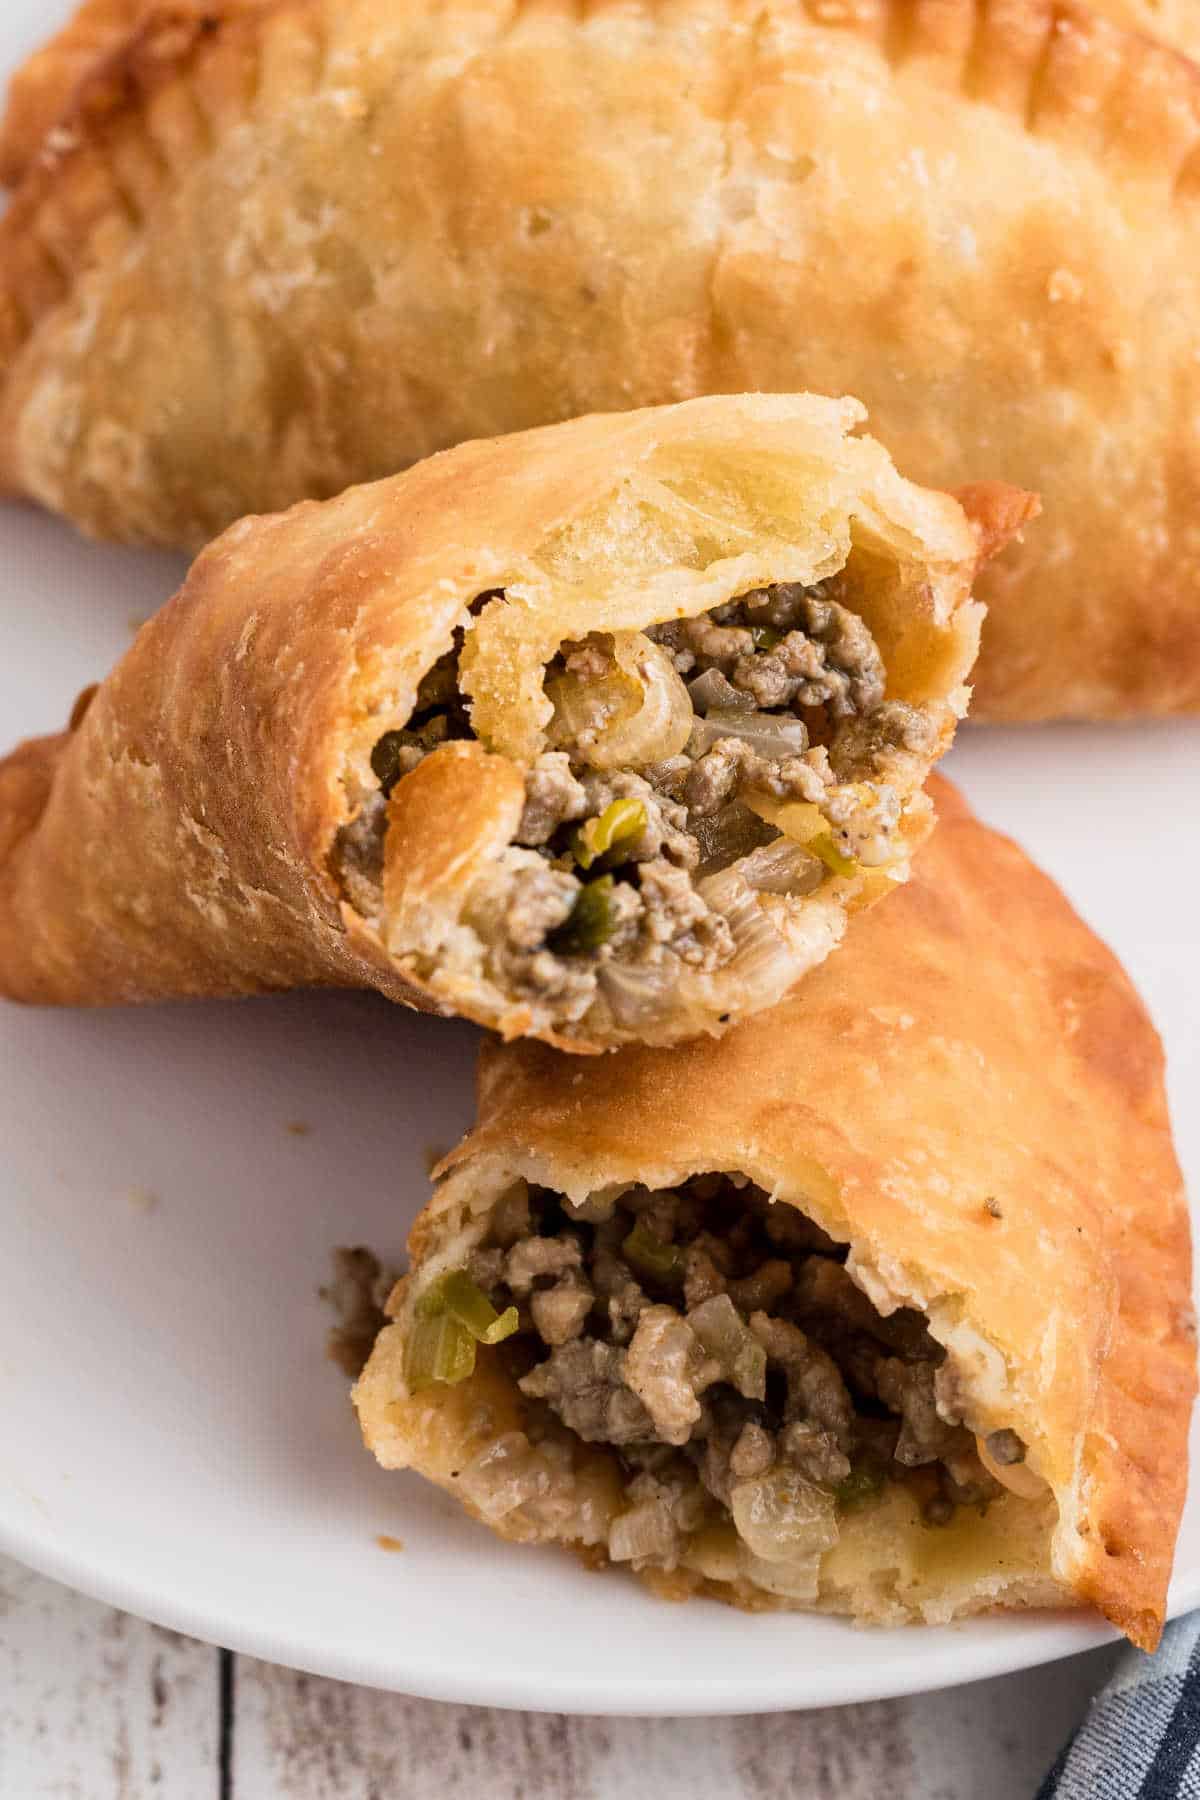 A Natchitoches Meat Pie Recipe image of a pie in half.